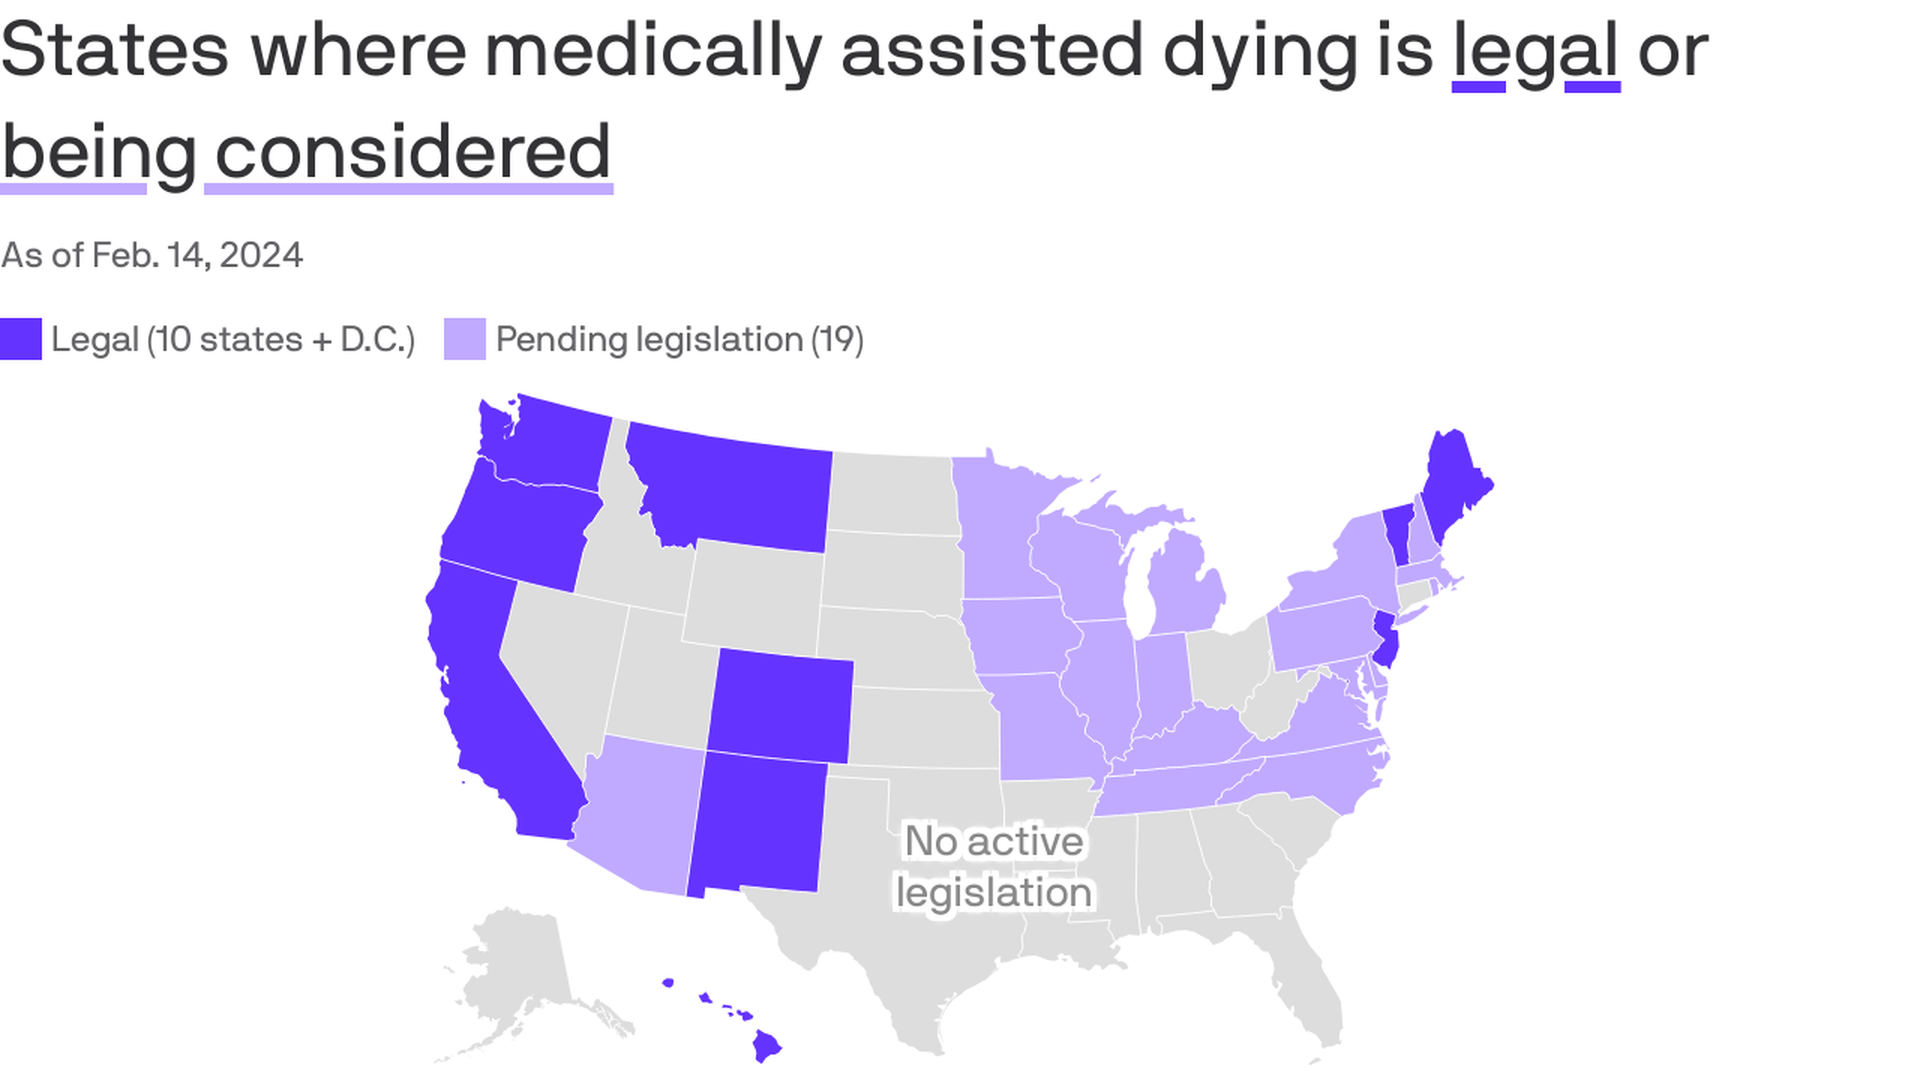 Choropleth map showing there are 19 states with active legislation considering medical aid in dying. In 10 states and D.C., medical aid in dying is legal.